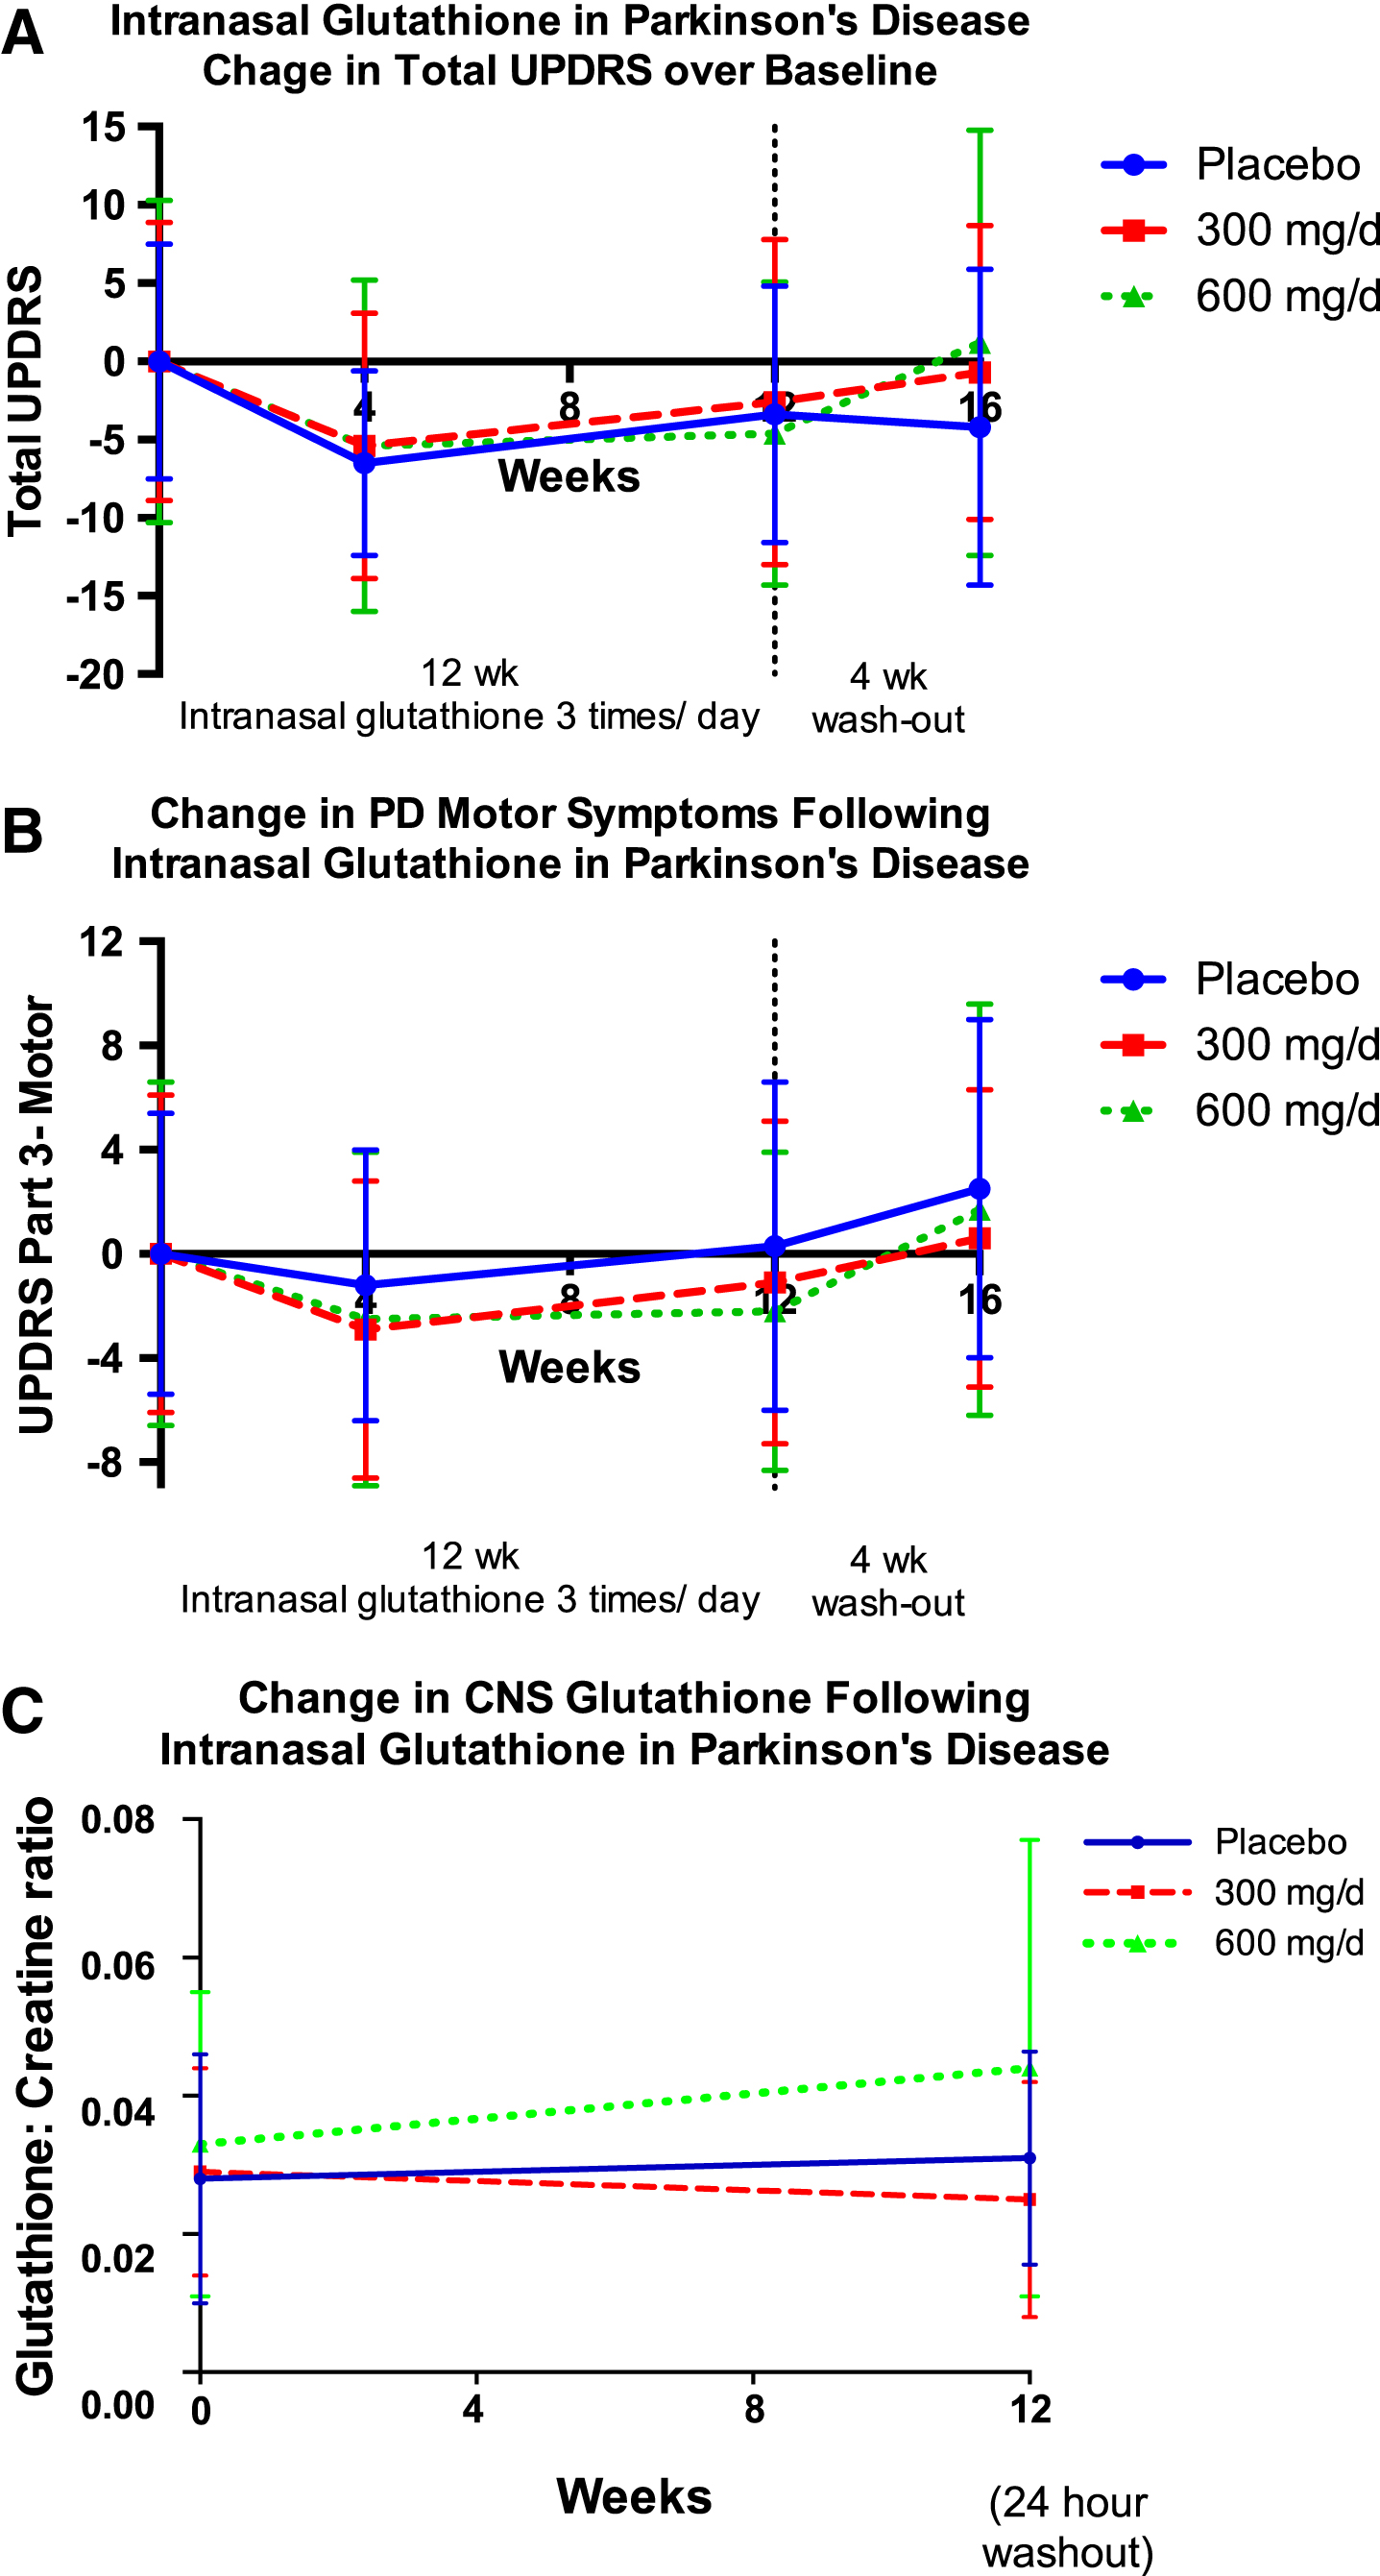 Change in mean total UPDRS (A), UPDRS-Motor Subscore (Part 3) (B), and central nervous system (CNS) glutathione (C) over the twelve weeks of the study, and following a four-week washout period. CNS glutathione (as GSH / total creatine peak area ratio) was measured by proton magnetic resonance spectroscopy (1H-MRS) and the volume of interest was a 4×4×5 cm region centered on the left dorsal putamen at the level of the lentiform nucleus. Error bars indicate SD.